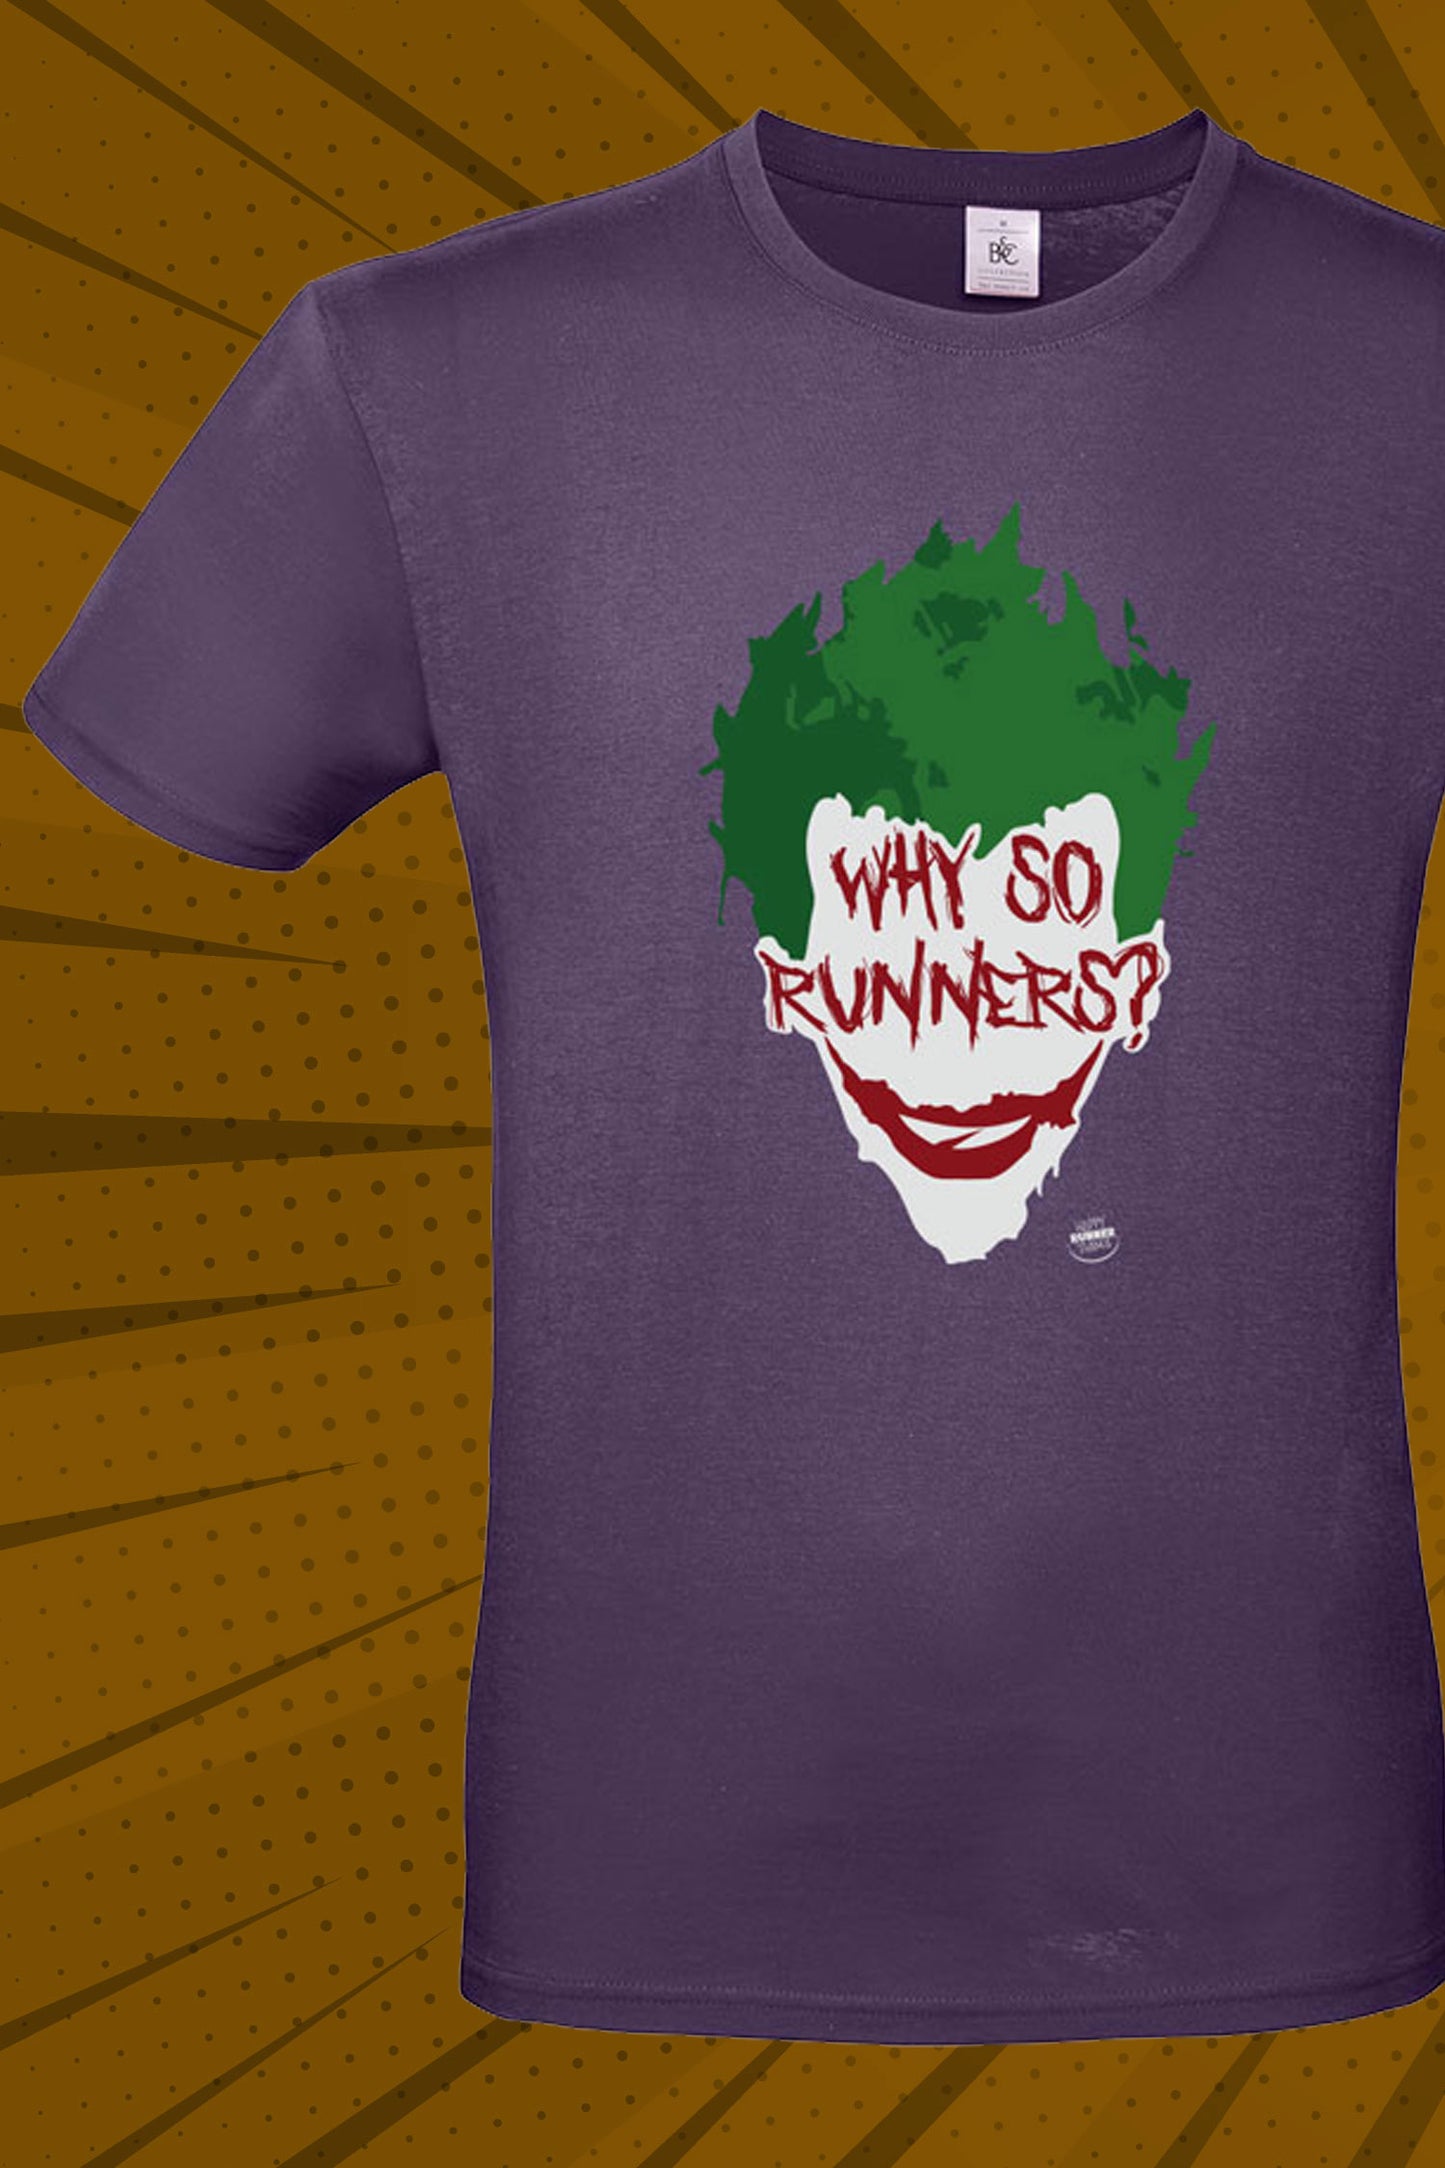 Why So Runners? - Camiseta Casual Unisex - Outlet